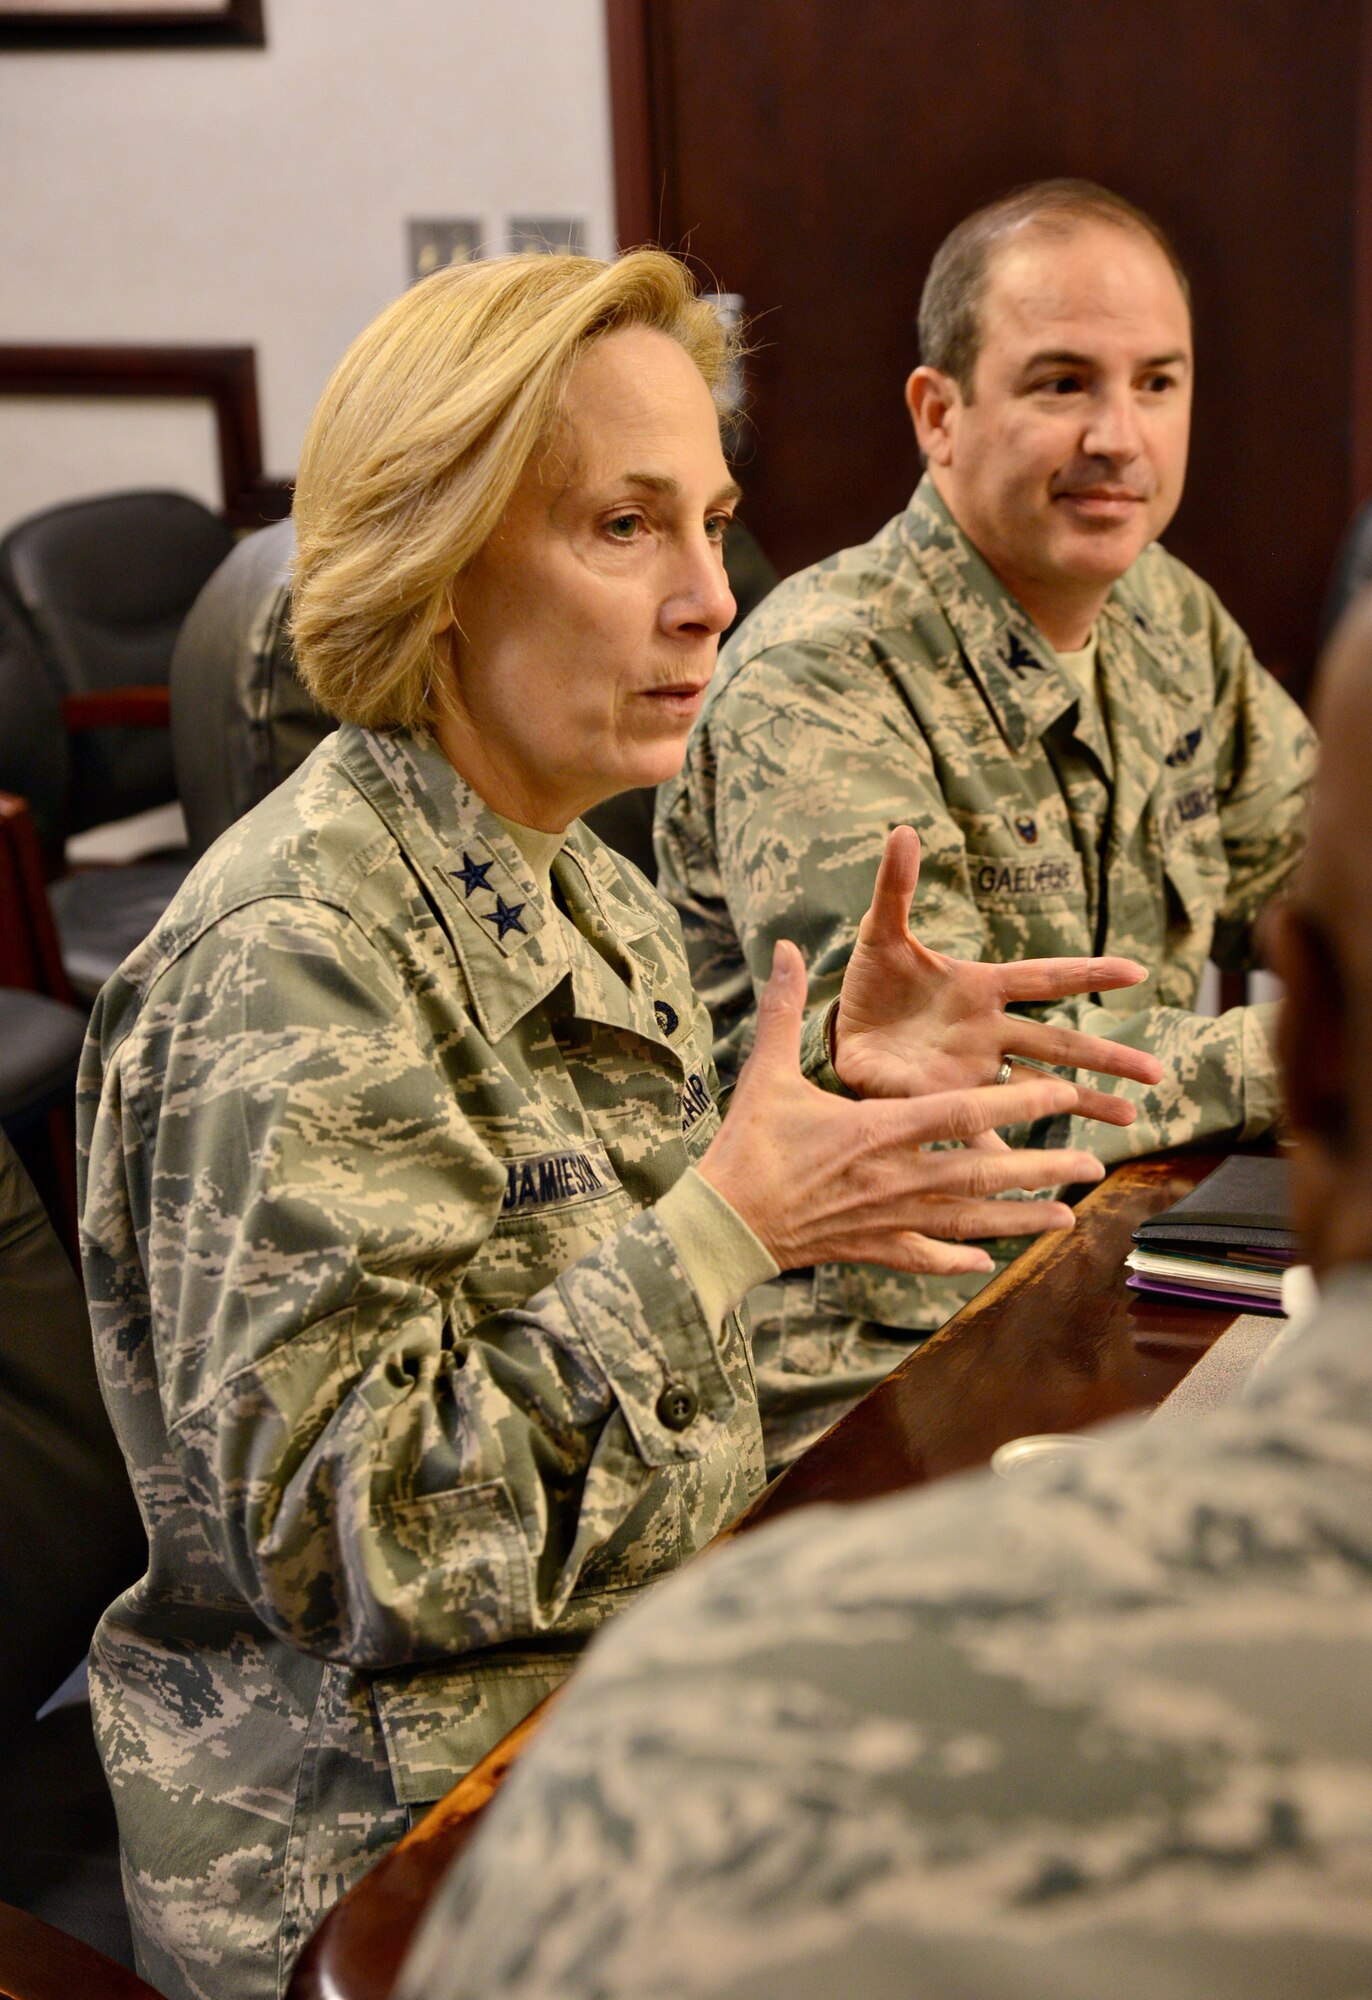 Maj. Gen. VeraLinn Jamieson, director of Intelligence, Air Combat Command, Joint Base Langley-Eustis, Va., visited the 552nd Air Control Wing and the Oklahoma City Air Logistics Complex on Dec. 1-2. The general was given an overview of the three groups within the 552nd ACW, she briefed 552nd members on fusion warfare and shared a working lunch with intel Airmen during her visit to Tinker. With the general is 552nd ACW Commander Col. David Gaedecke. (Air Force photo by Kelly White/Released)